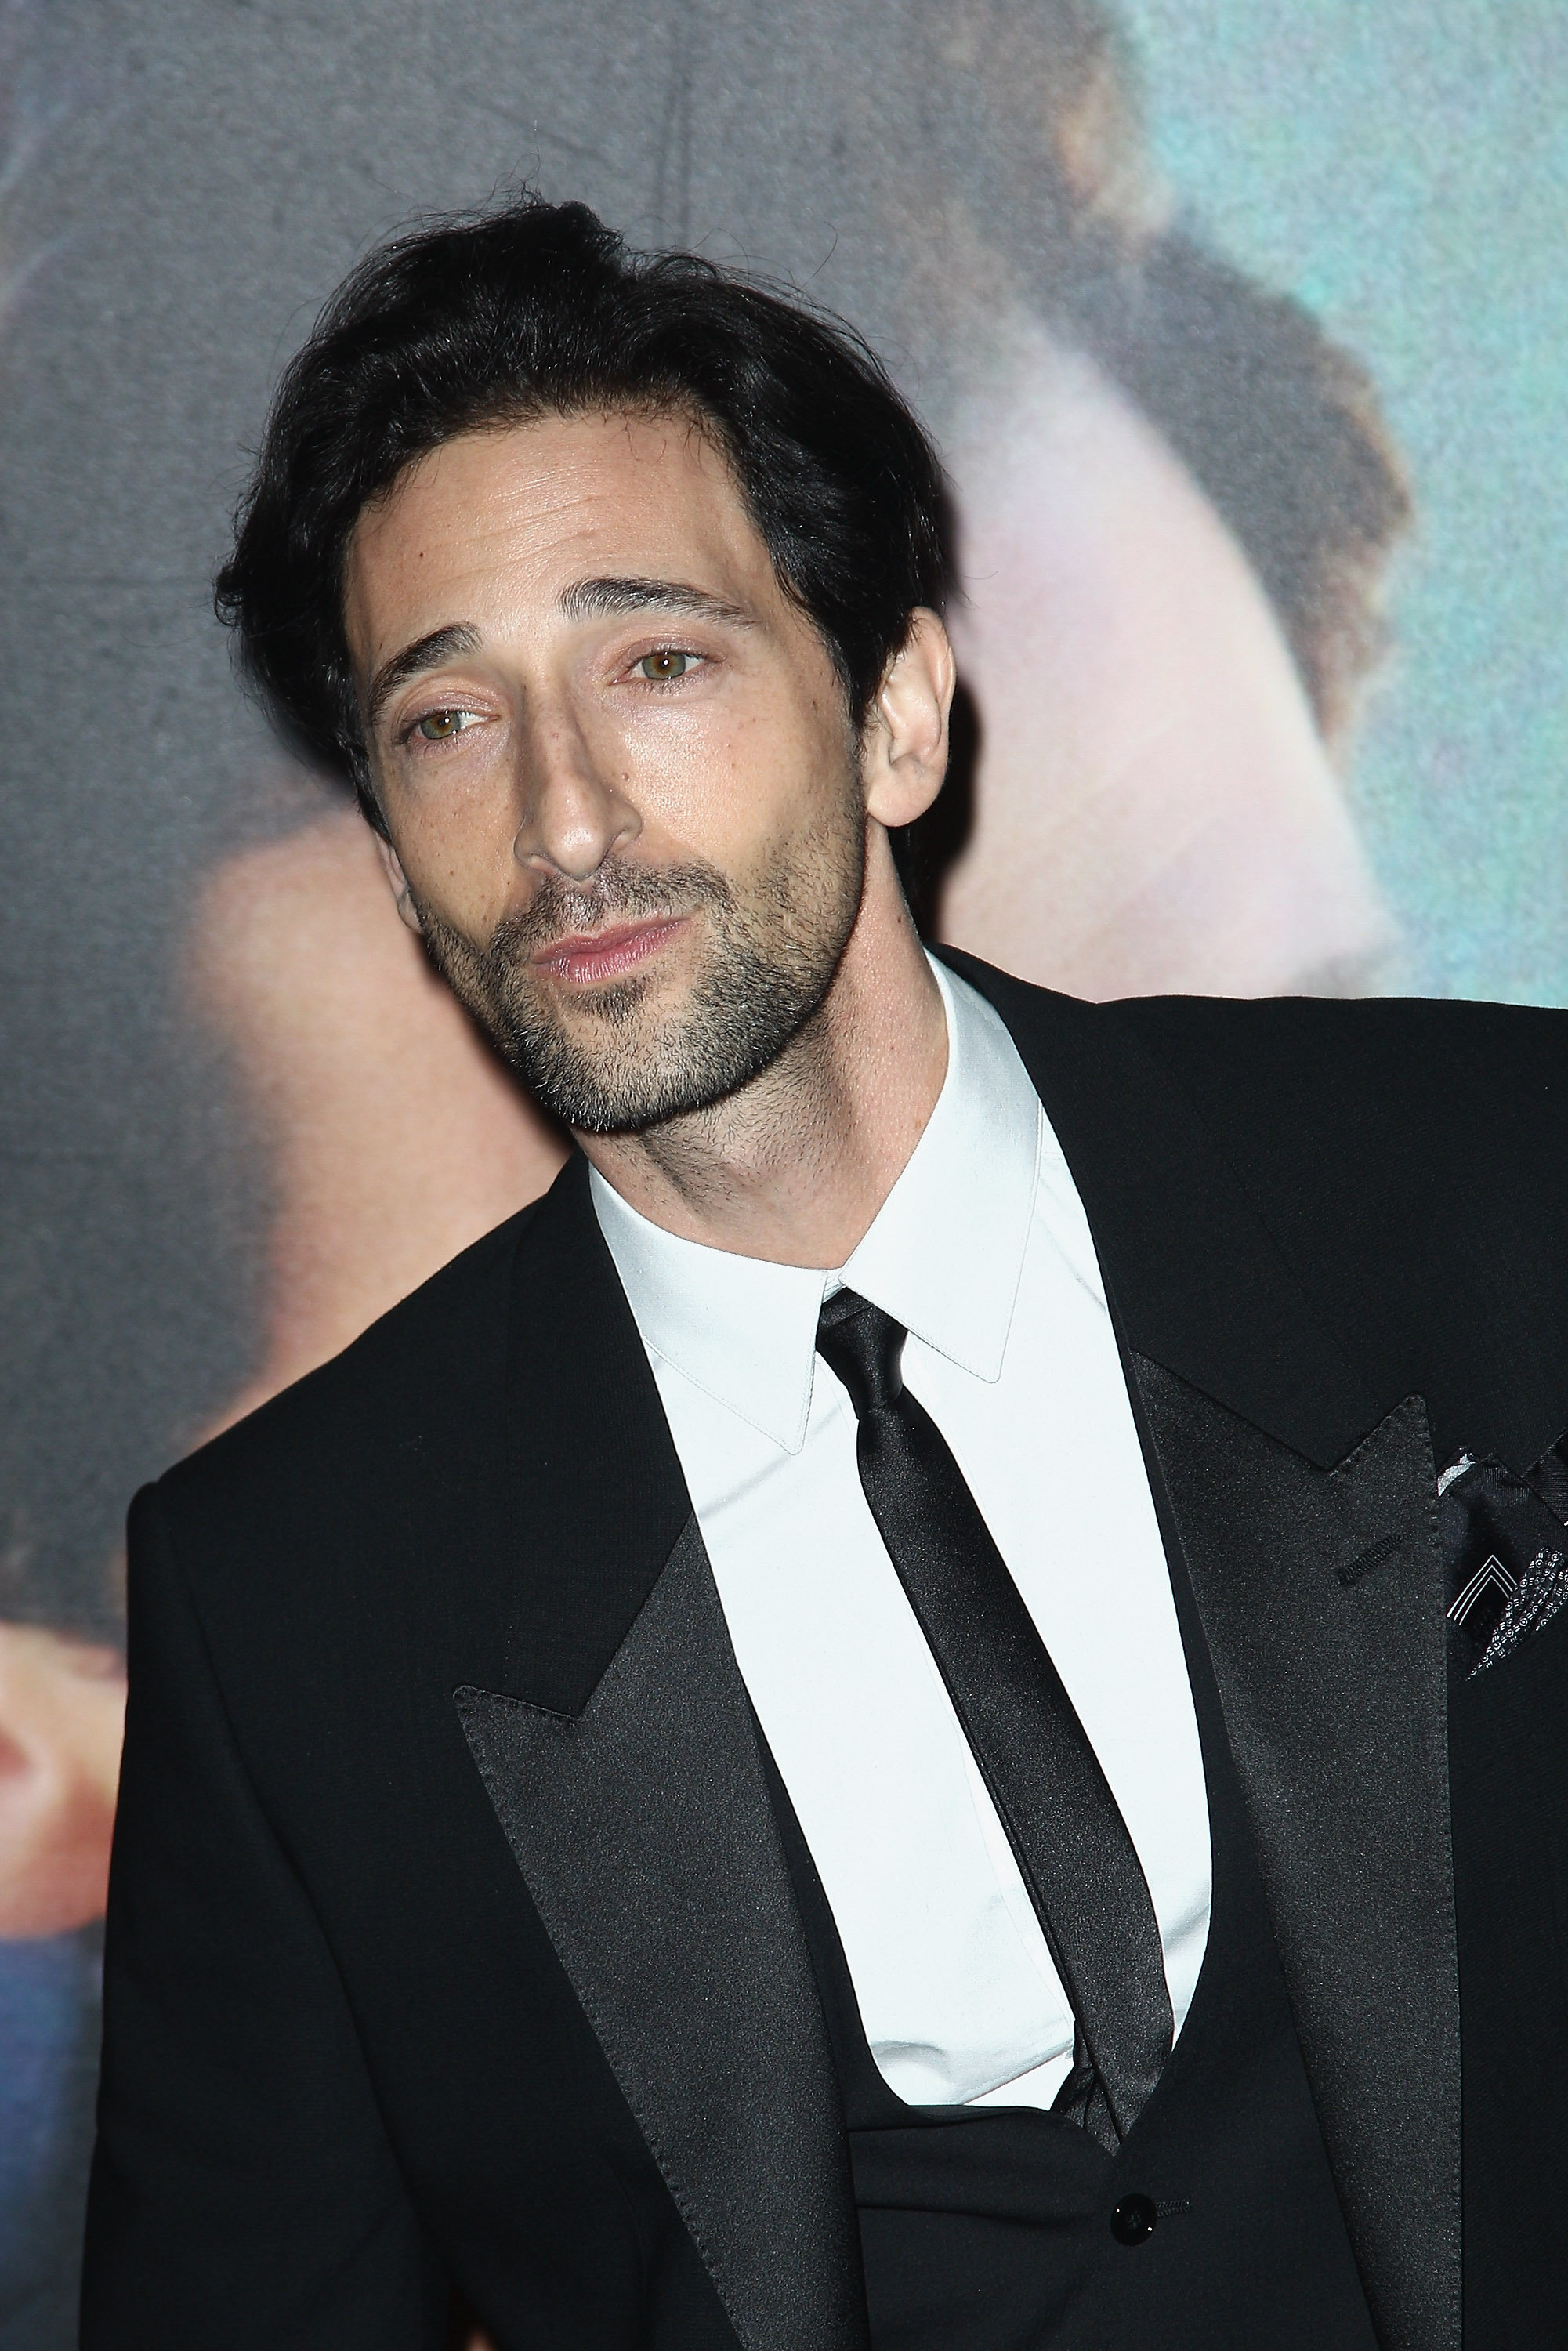 Adrien Brody Detachment Star On The Education System The Pianist   Being Banned From SNL  HuffPost Entertainment